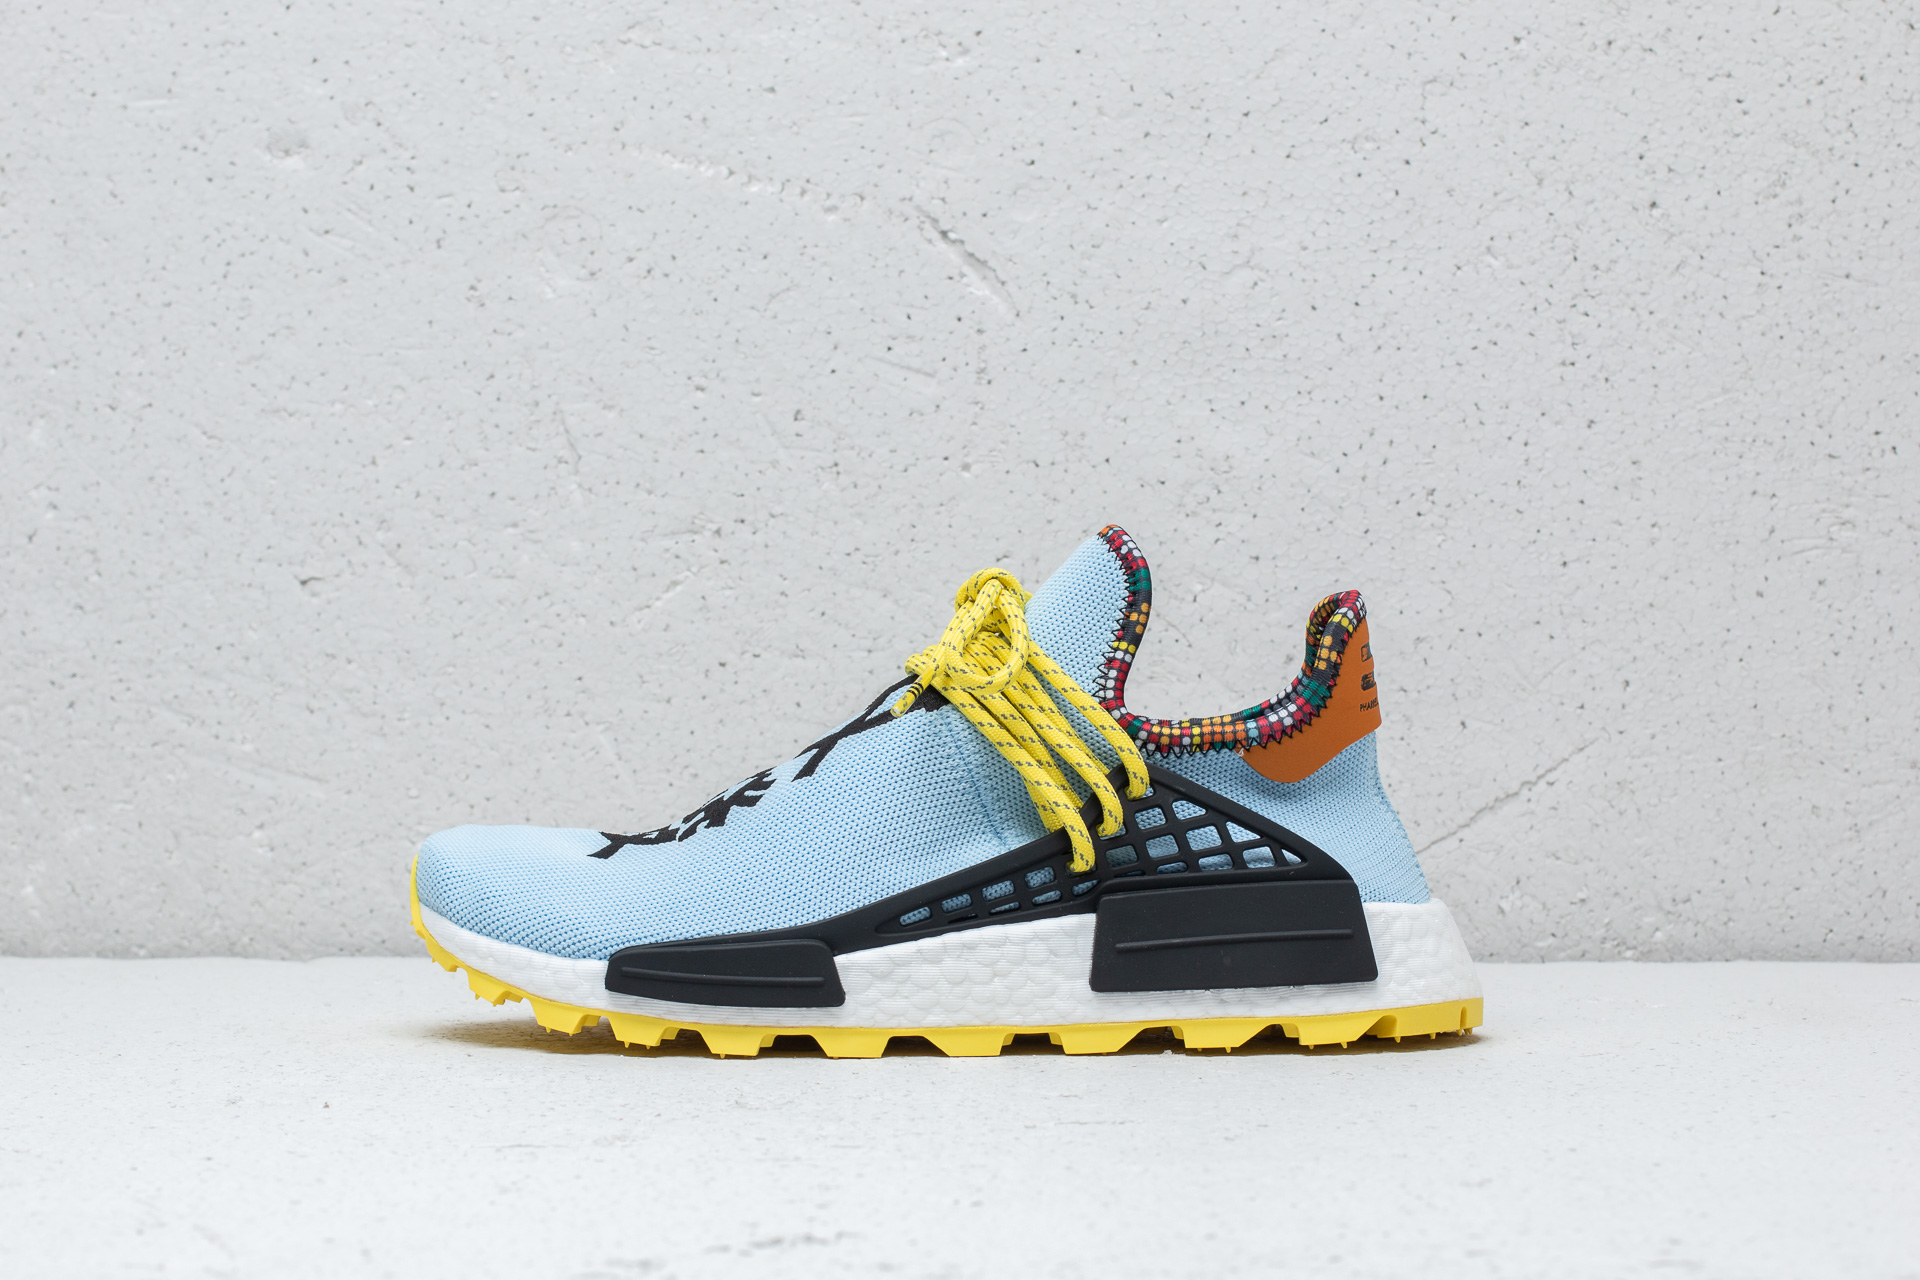 adidas X Pharrell Williams PW Hu NMD - EE7581 - CLEAR SKY / BRIGHT YELLOW BLACK - Footshop - Releases